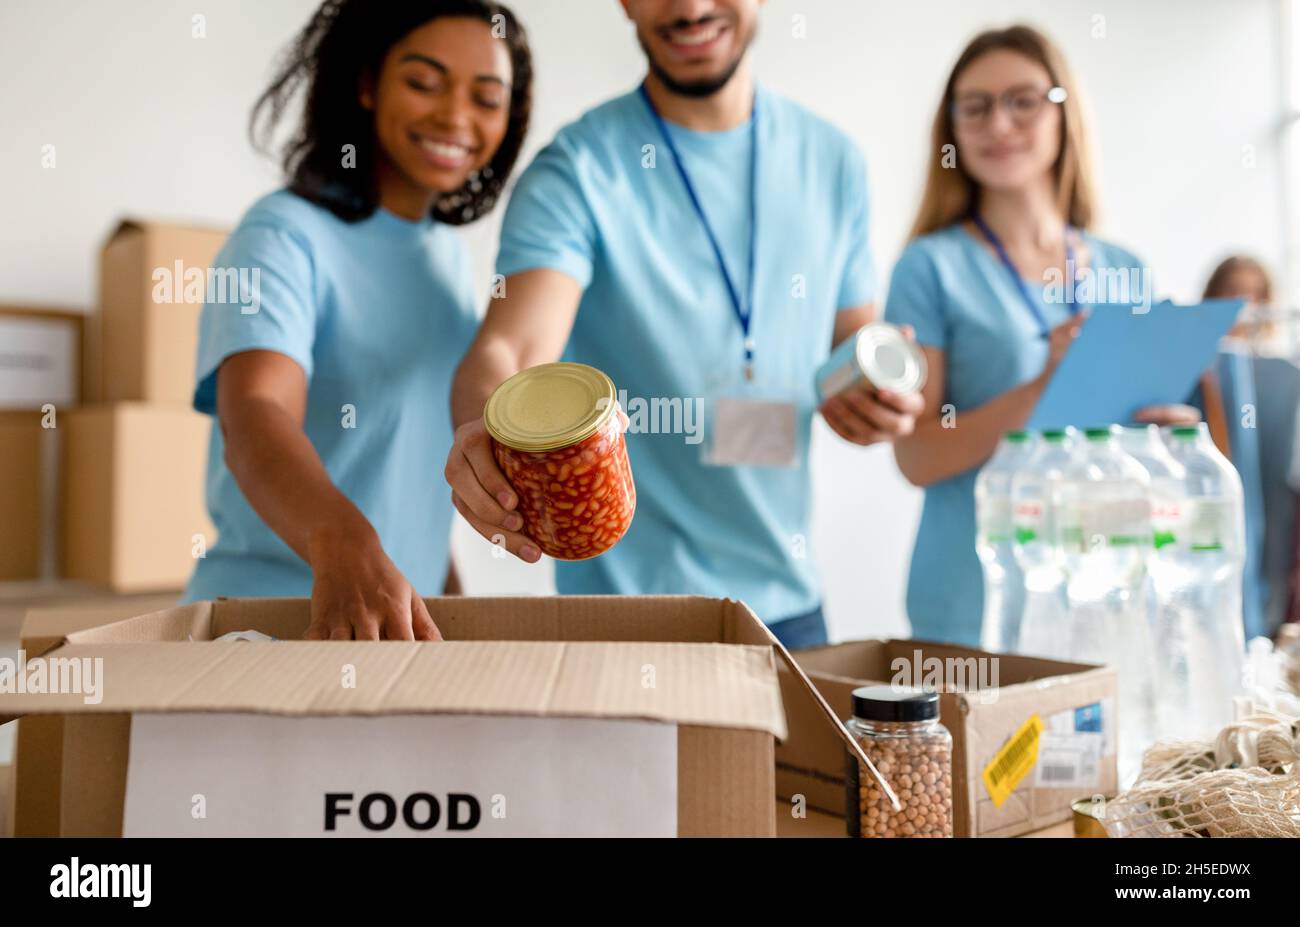 Millennial volunteers putting jars in box while sorting donated food, working in community charity donation center Stock Photo